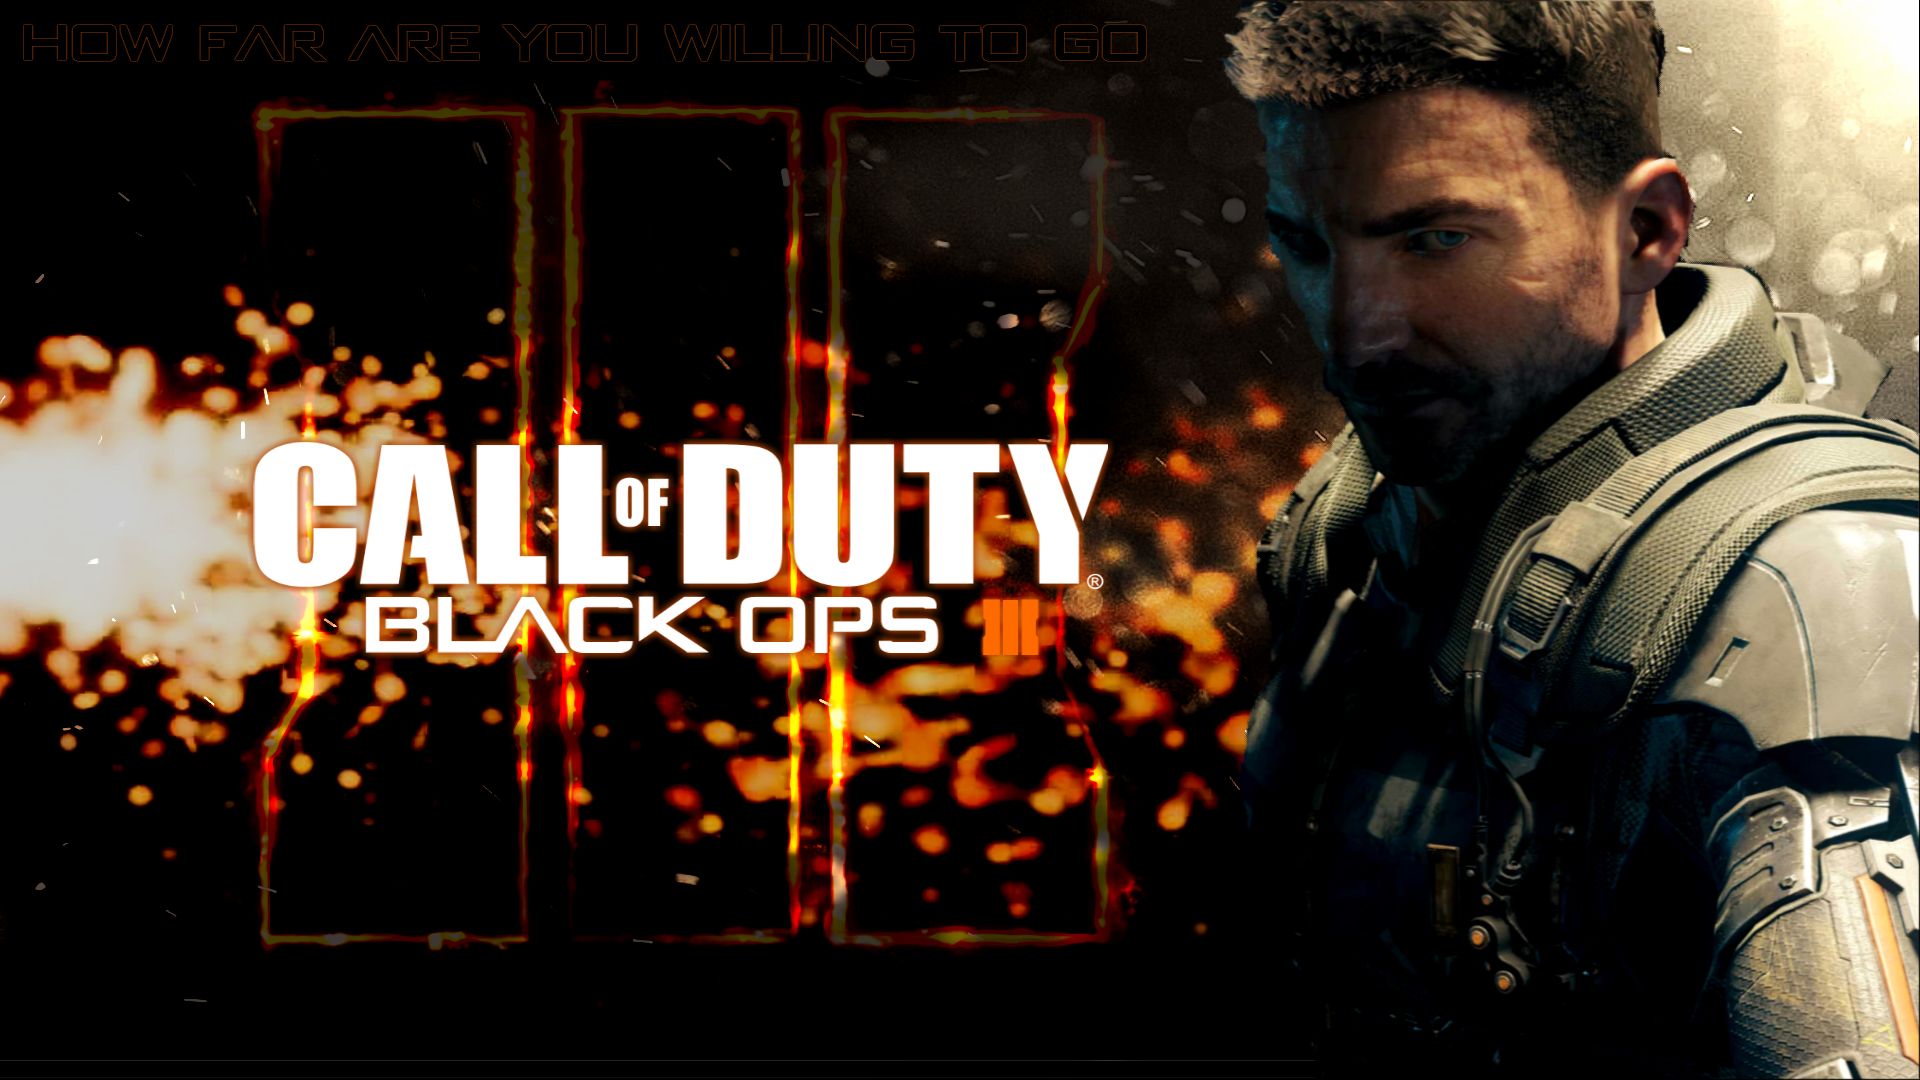 Call Of Duty Black Ops III Computer Wallpapers - Wallpaper Cave